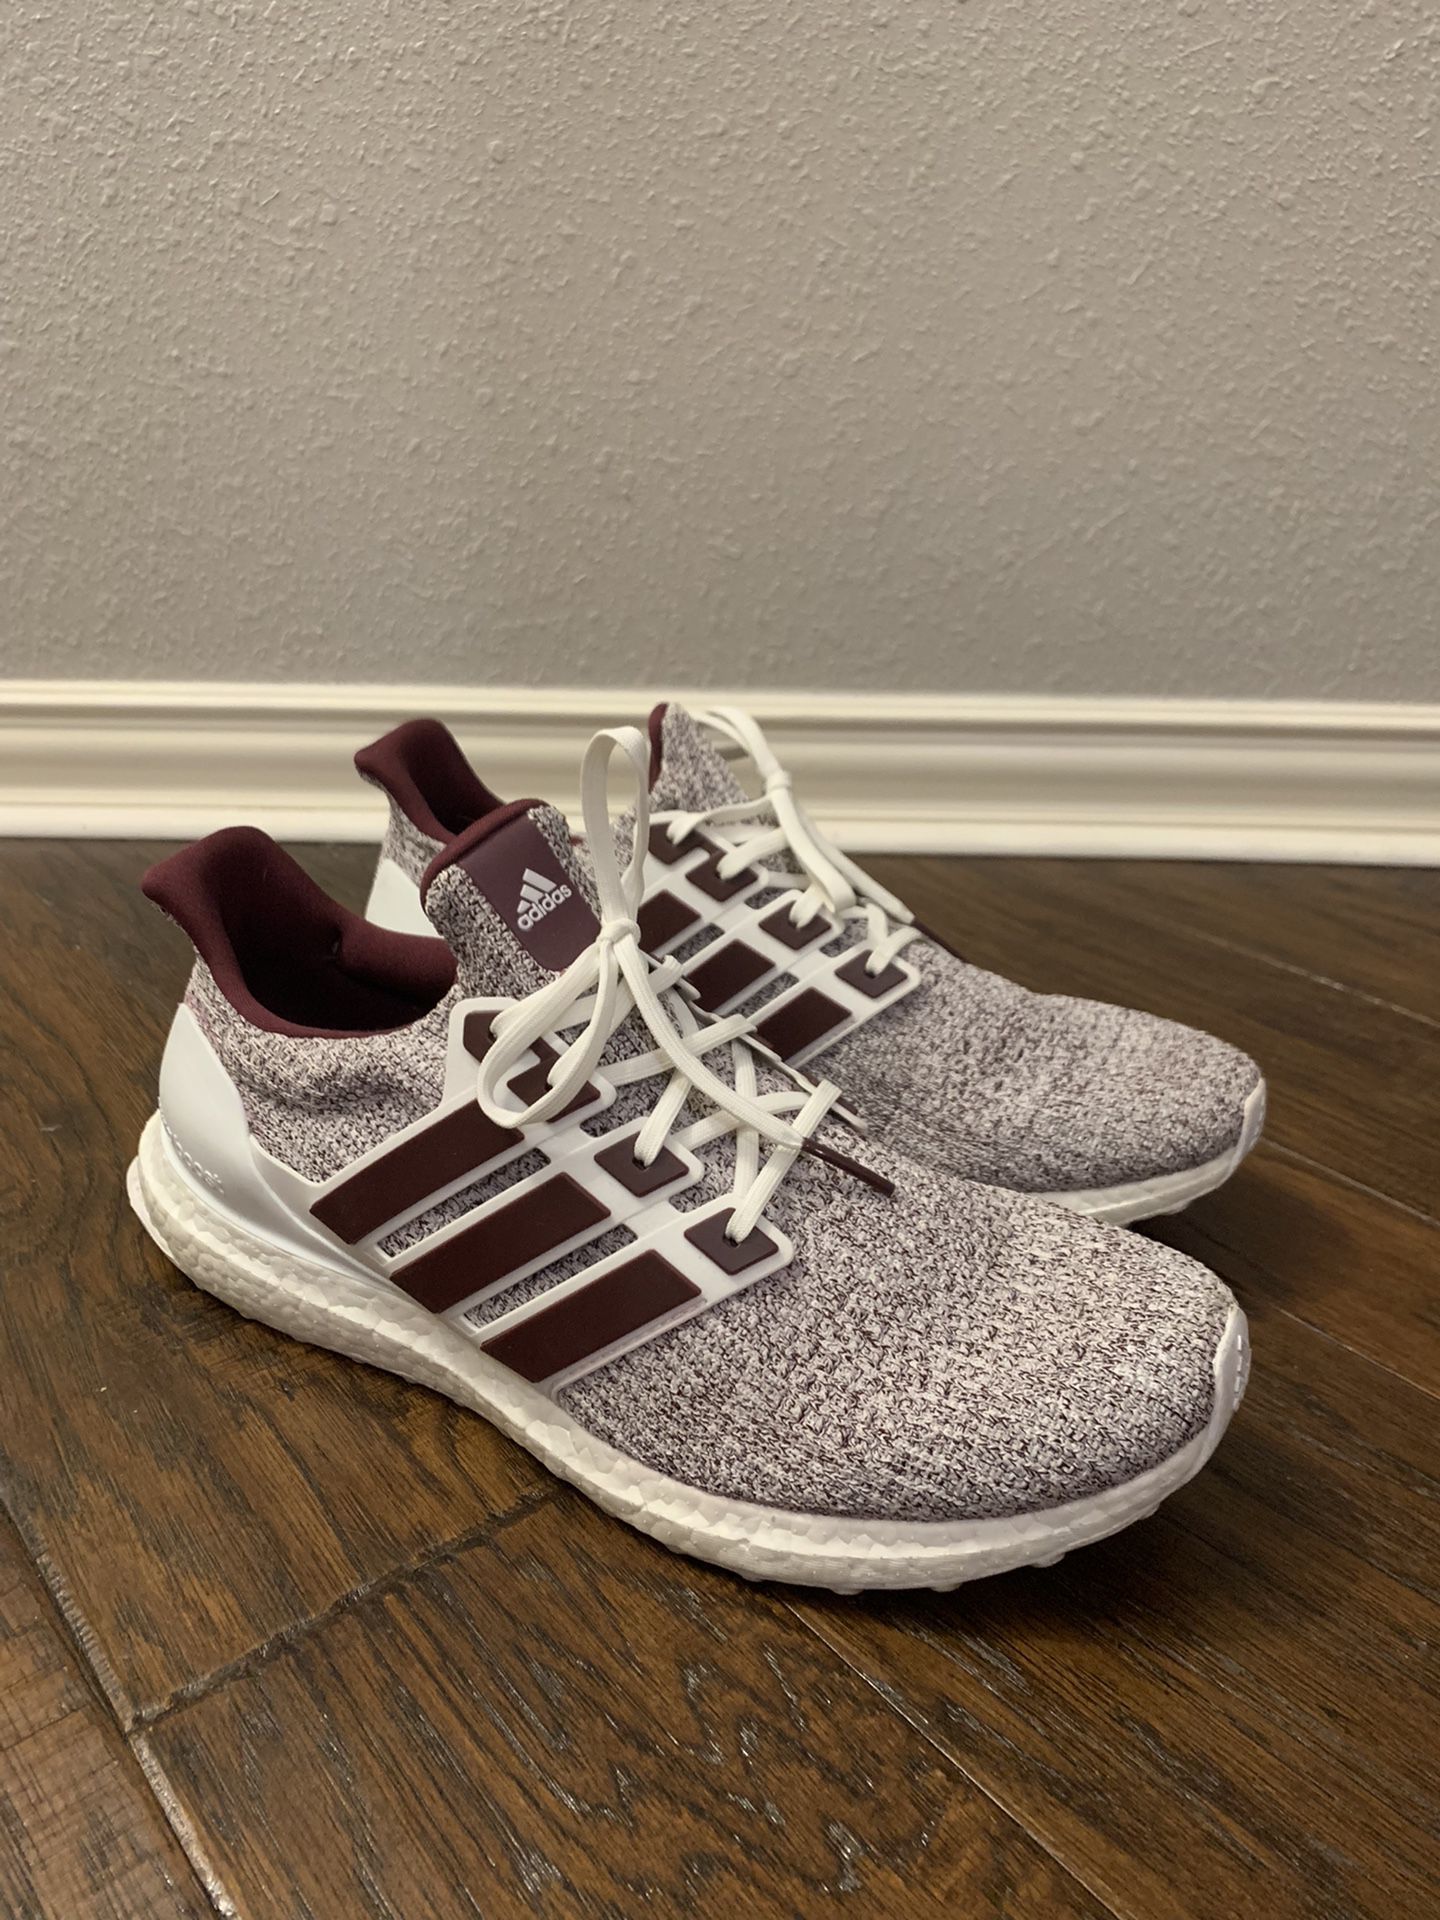 Zapatos prosa proposición Adidas Ultra Boost 4.0 Cloud White Maroon. Size: 13 for Sale in Katy, TX -  OfferUp